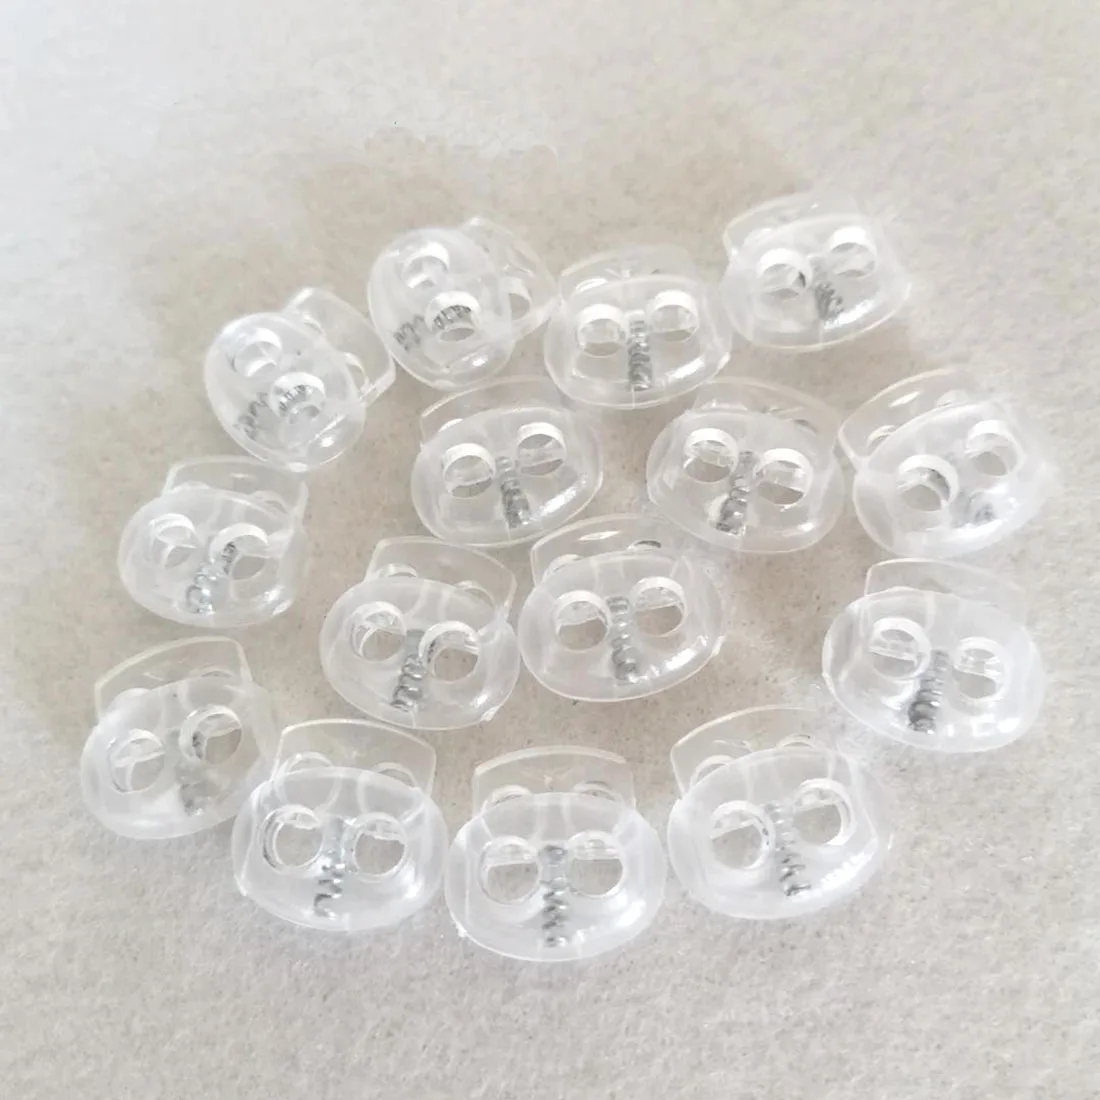 

100pcs/lot Cord Lock Plastic Stopper Cord End Toggle Clip Transparent Clear Frost Shoelace Sportswear DIY Bag Parts Accessories